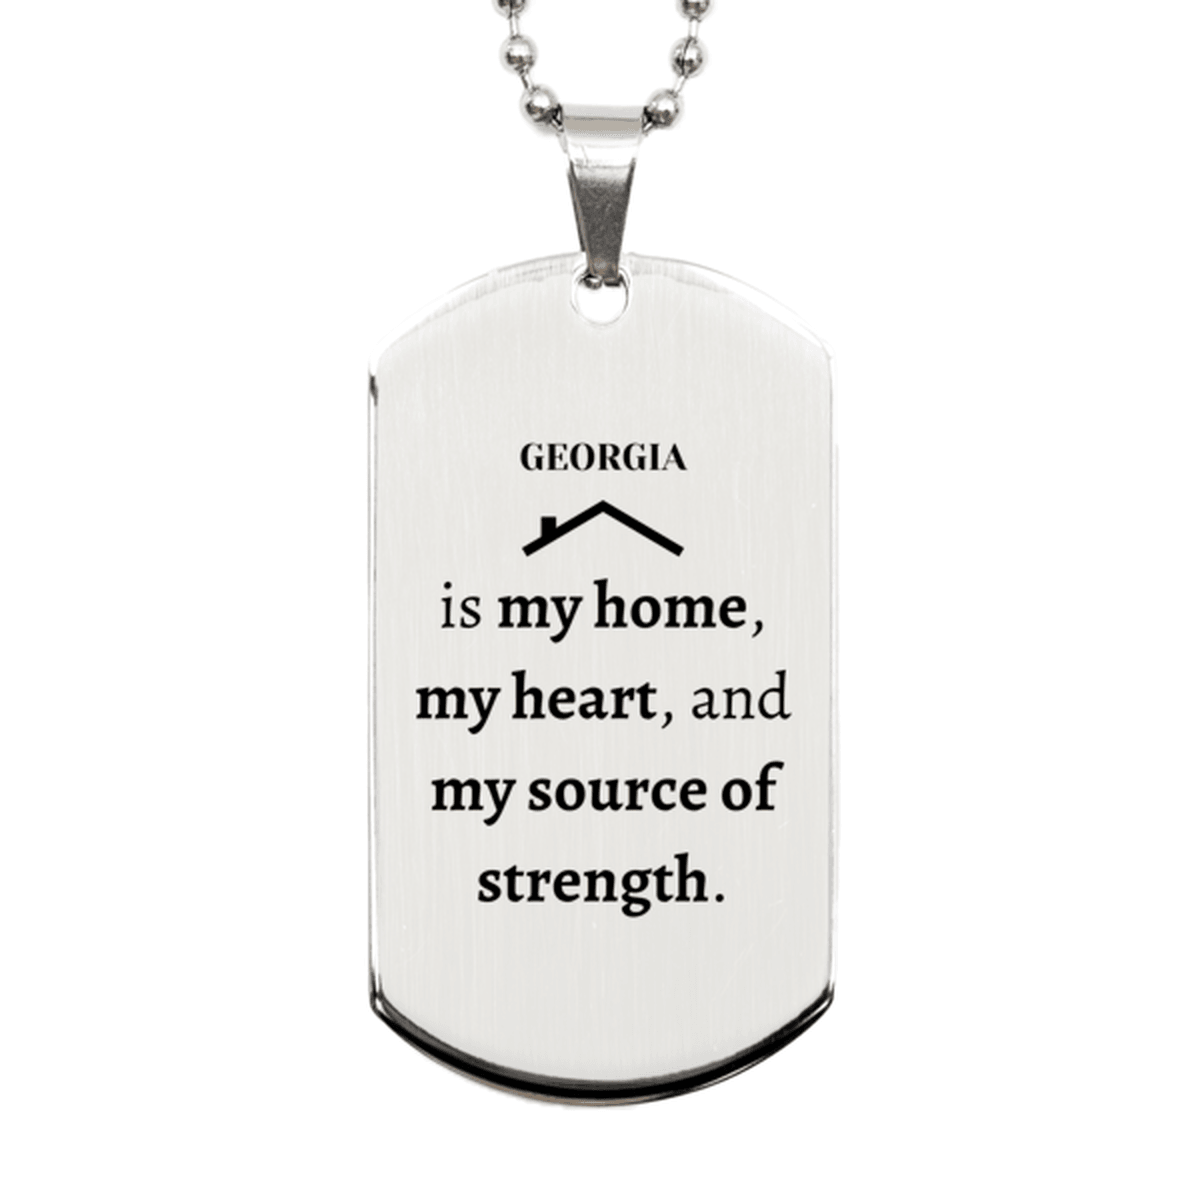 Georgia is my home Gifts, Lovely Georgia Birthday Christmas Silver Dog Tag For People from Georgia, Men, Women, Friends - Mallard Moon Gift Shop